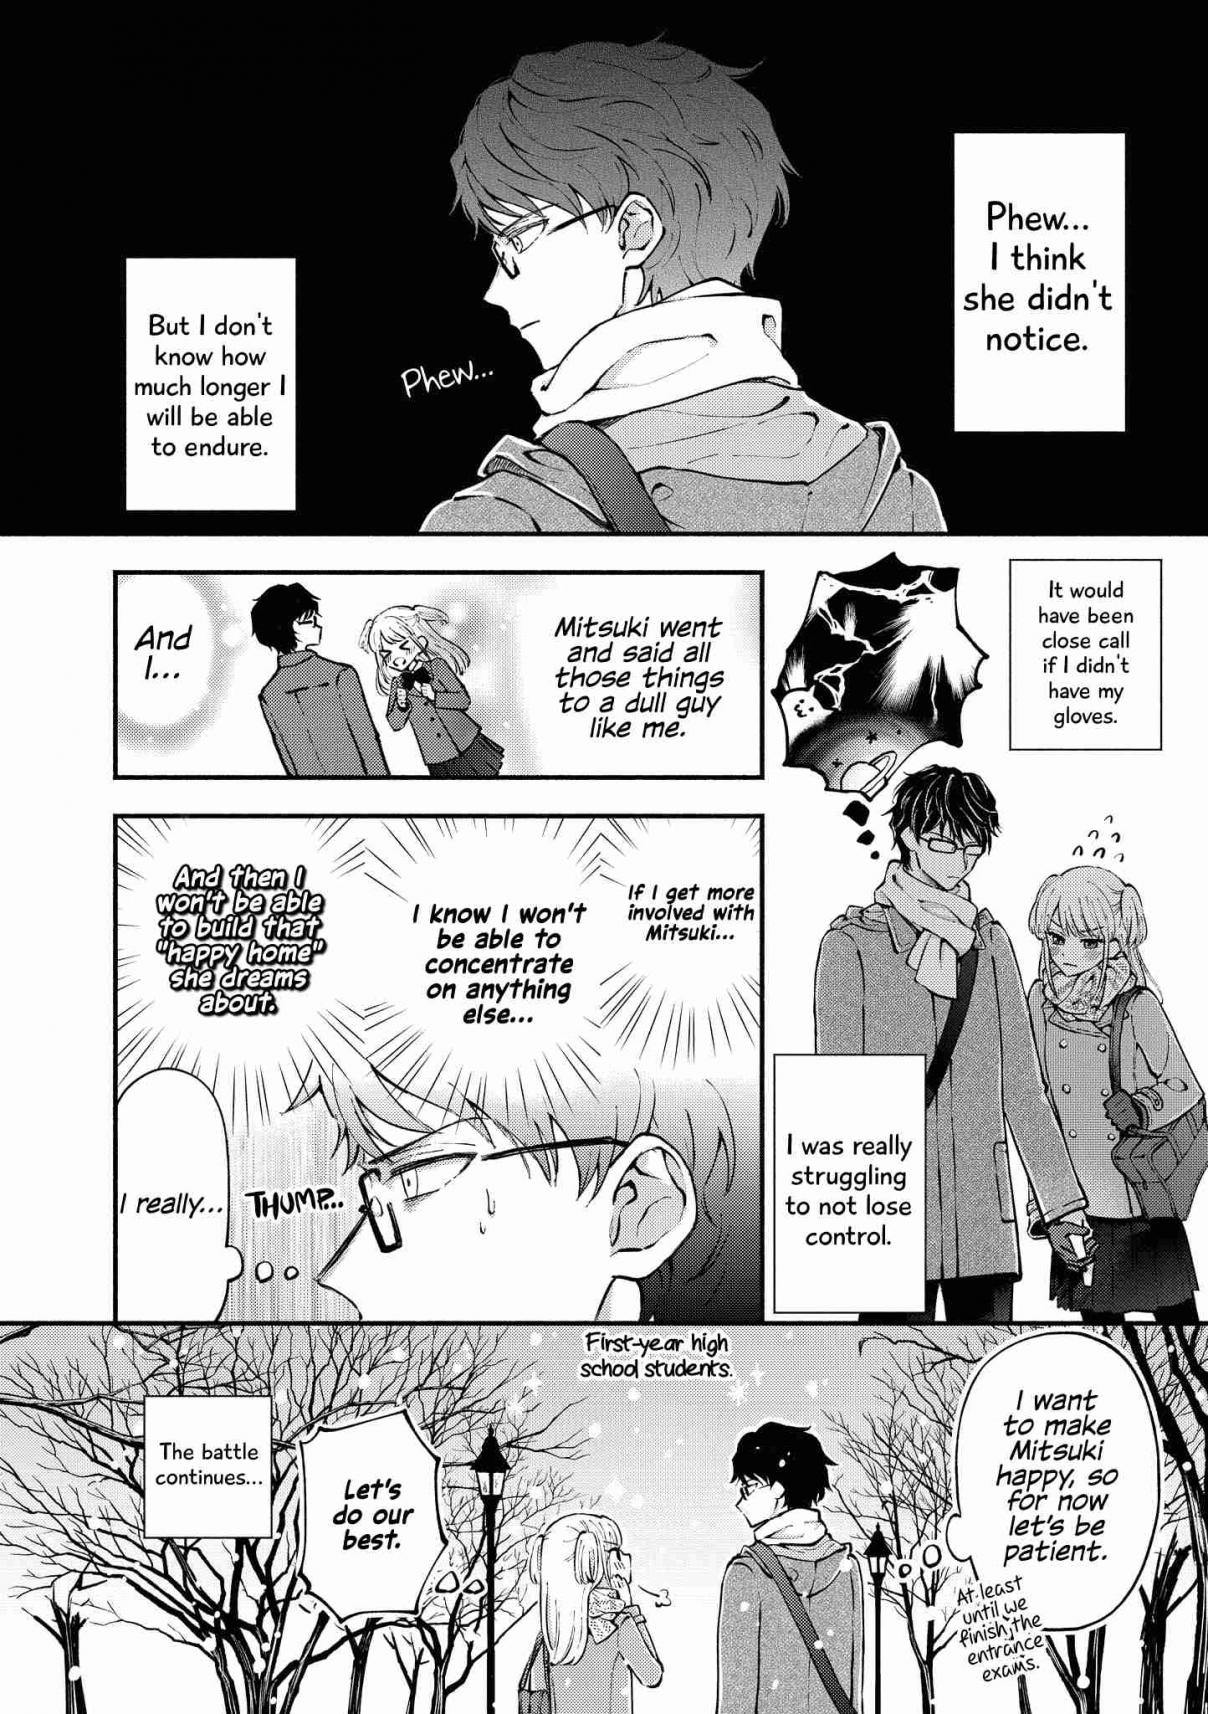 “It’s Too Precious and Hard to Read!!” 4P Short Stories Vol. 2 Ch. 40 My Cautious Childhood Friend [by Majiko]